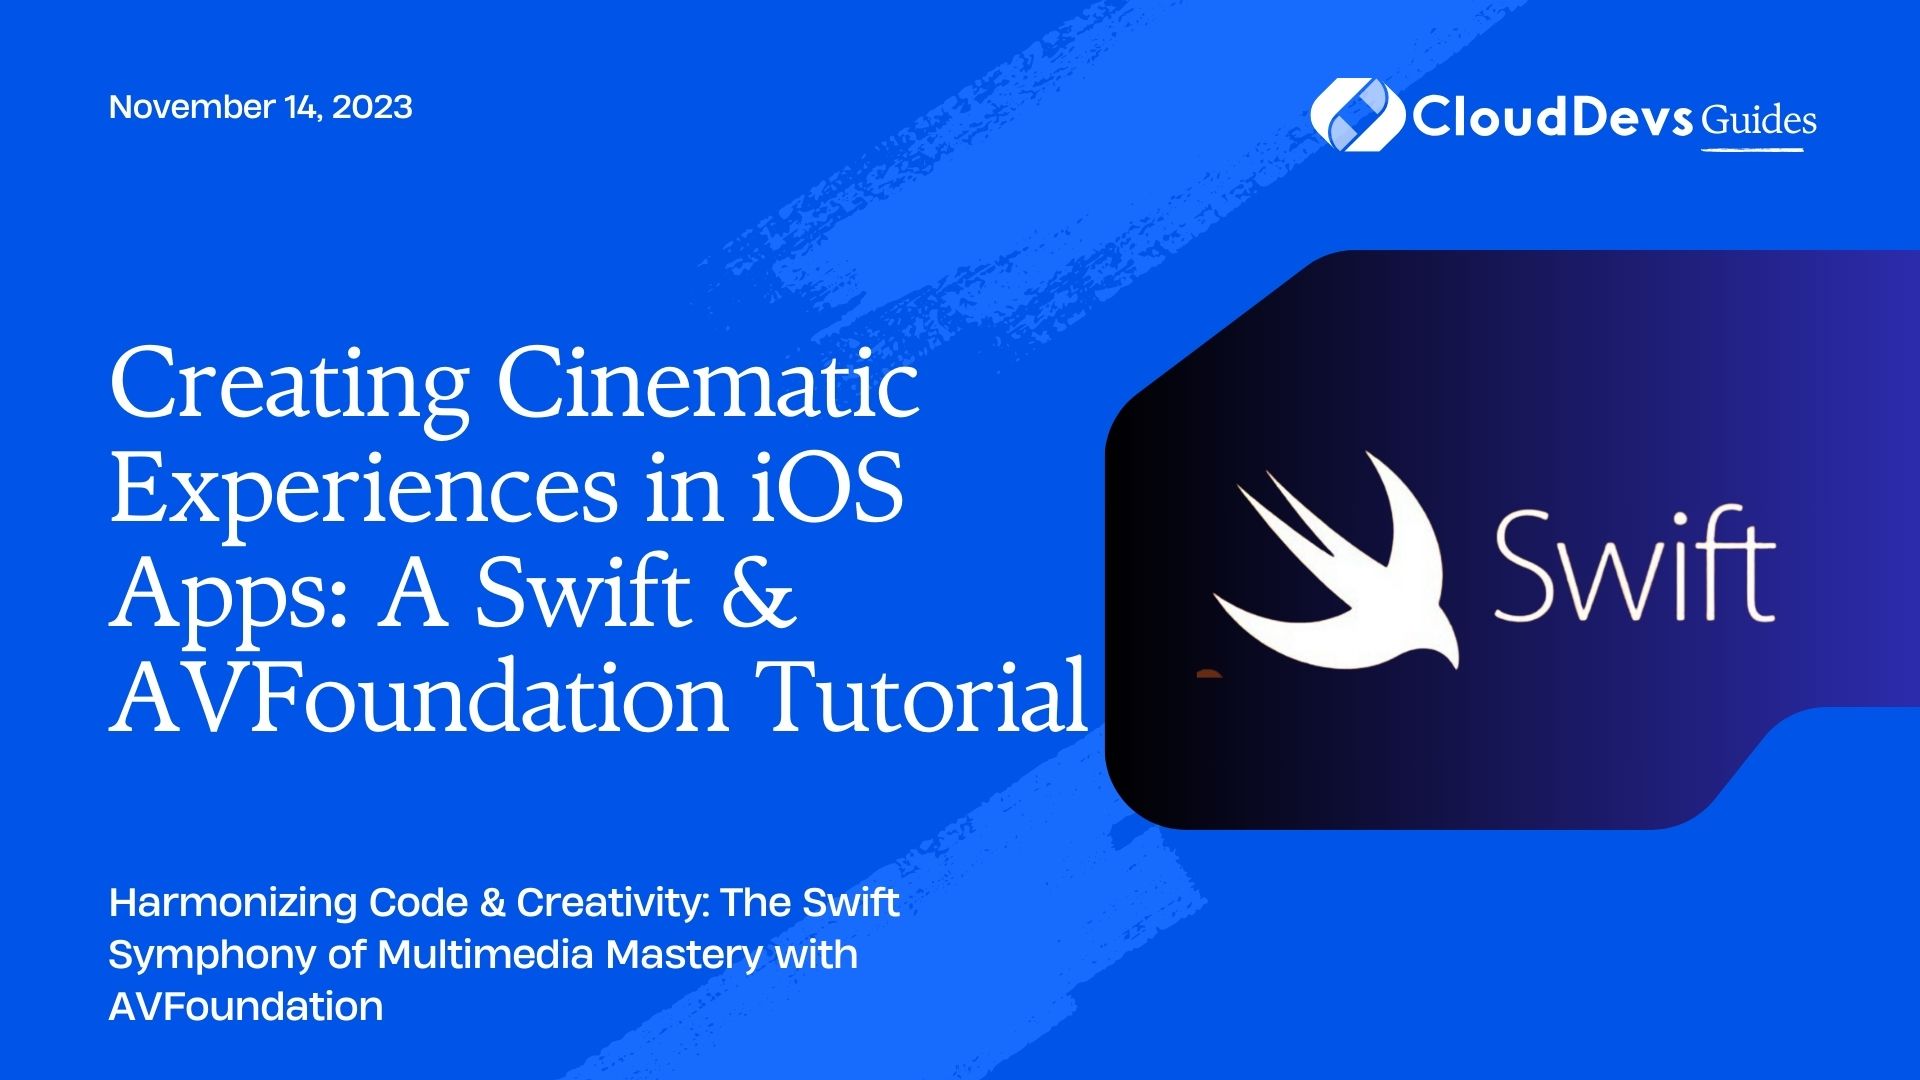 Creating Cinematic Experiences in iOS Apps: A Swift & AVFoundation Tutorial